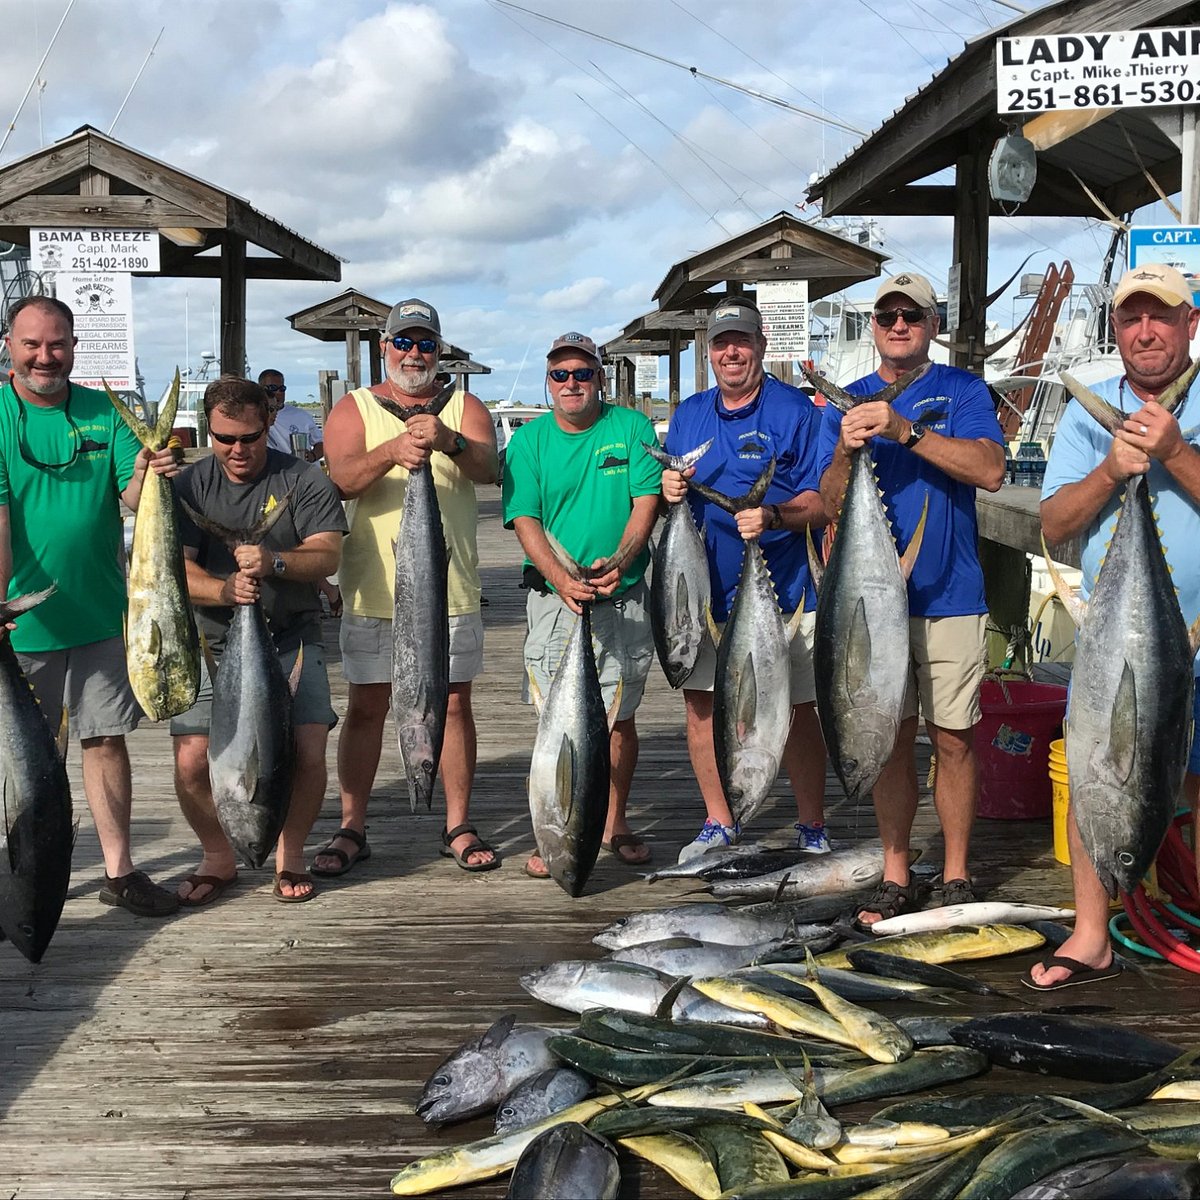 Capt. Mike's Deep Sea Fishing - All You Need to Know BEFORE You Go